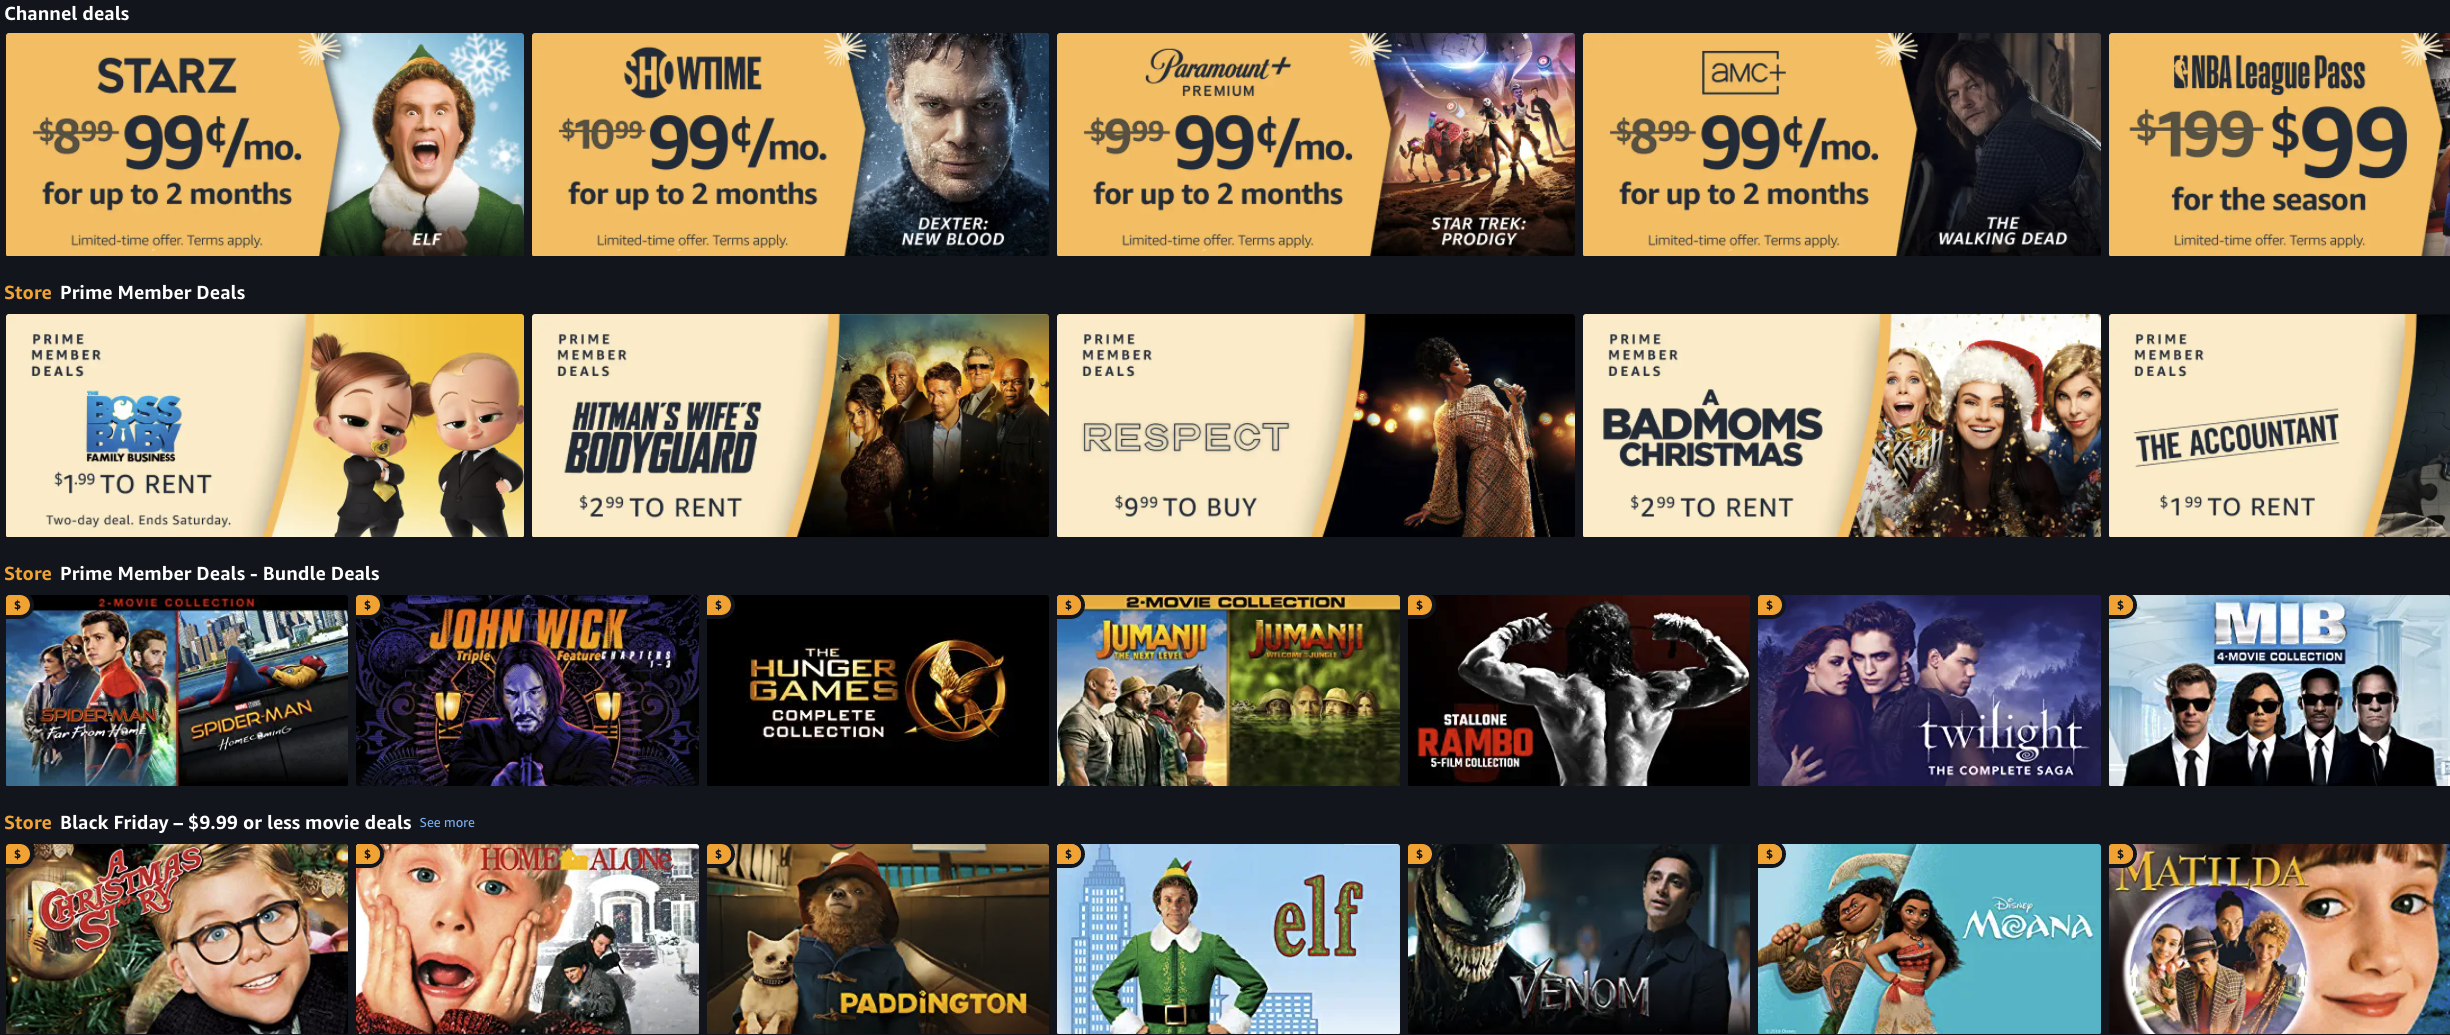 screenshot of the premium add-on options, which include Starz, Showtime, Paramount+, and more